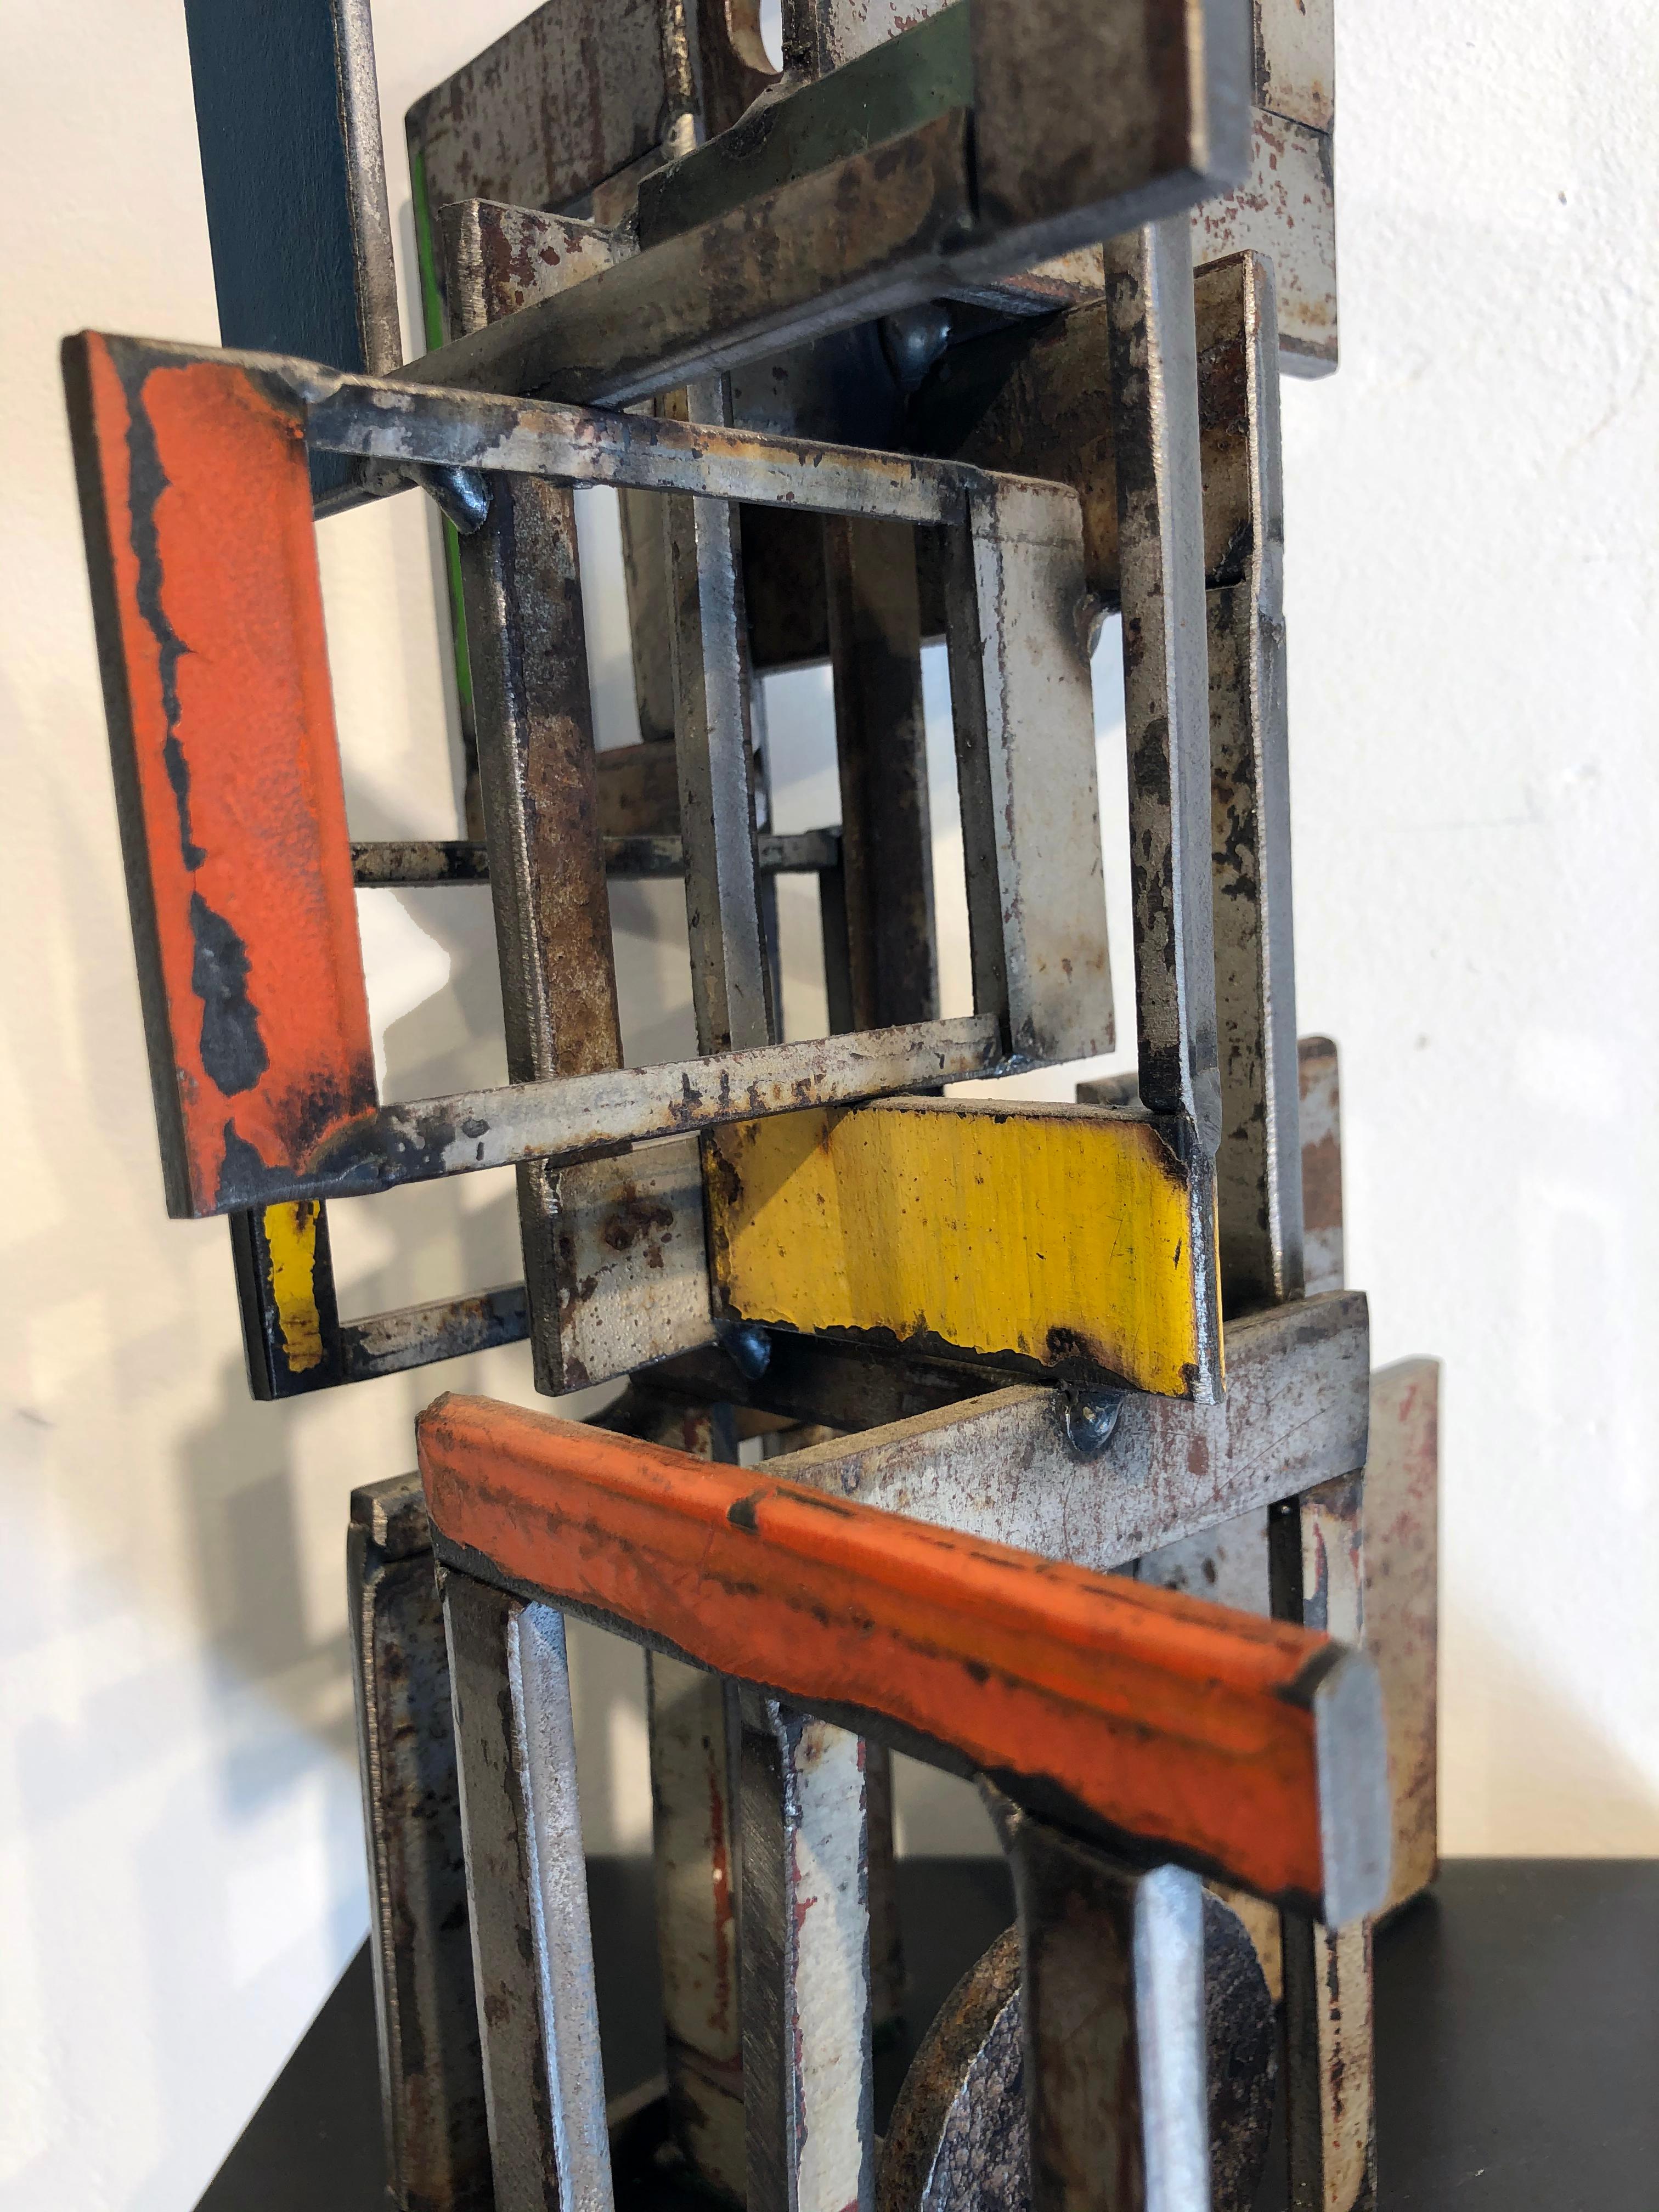 Object 1978, Steel Structure, Welded Sculptural Object Made w/ Salvaged Steel 3